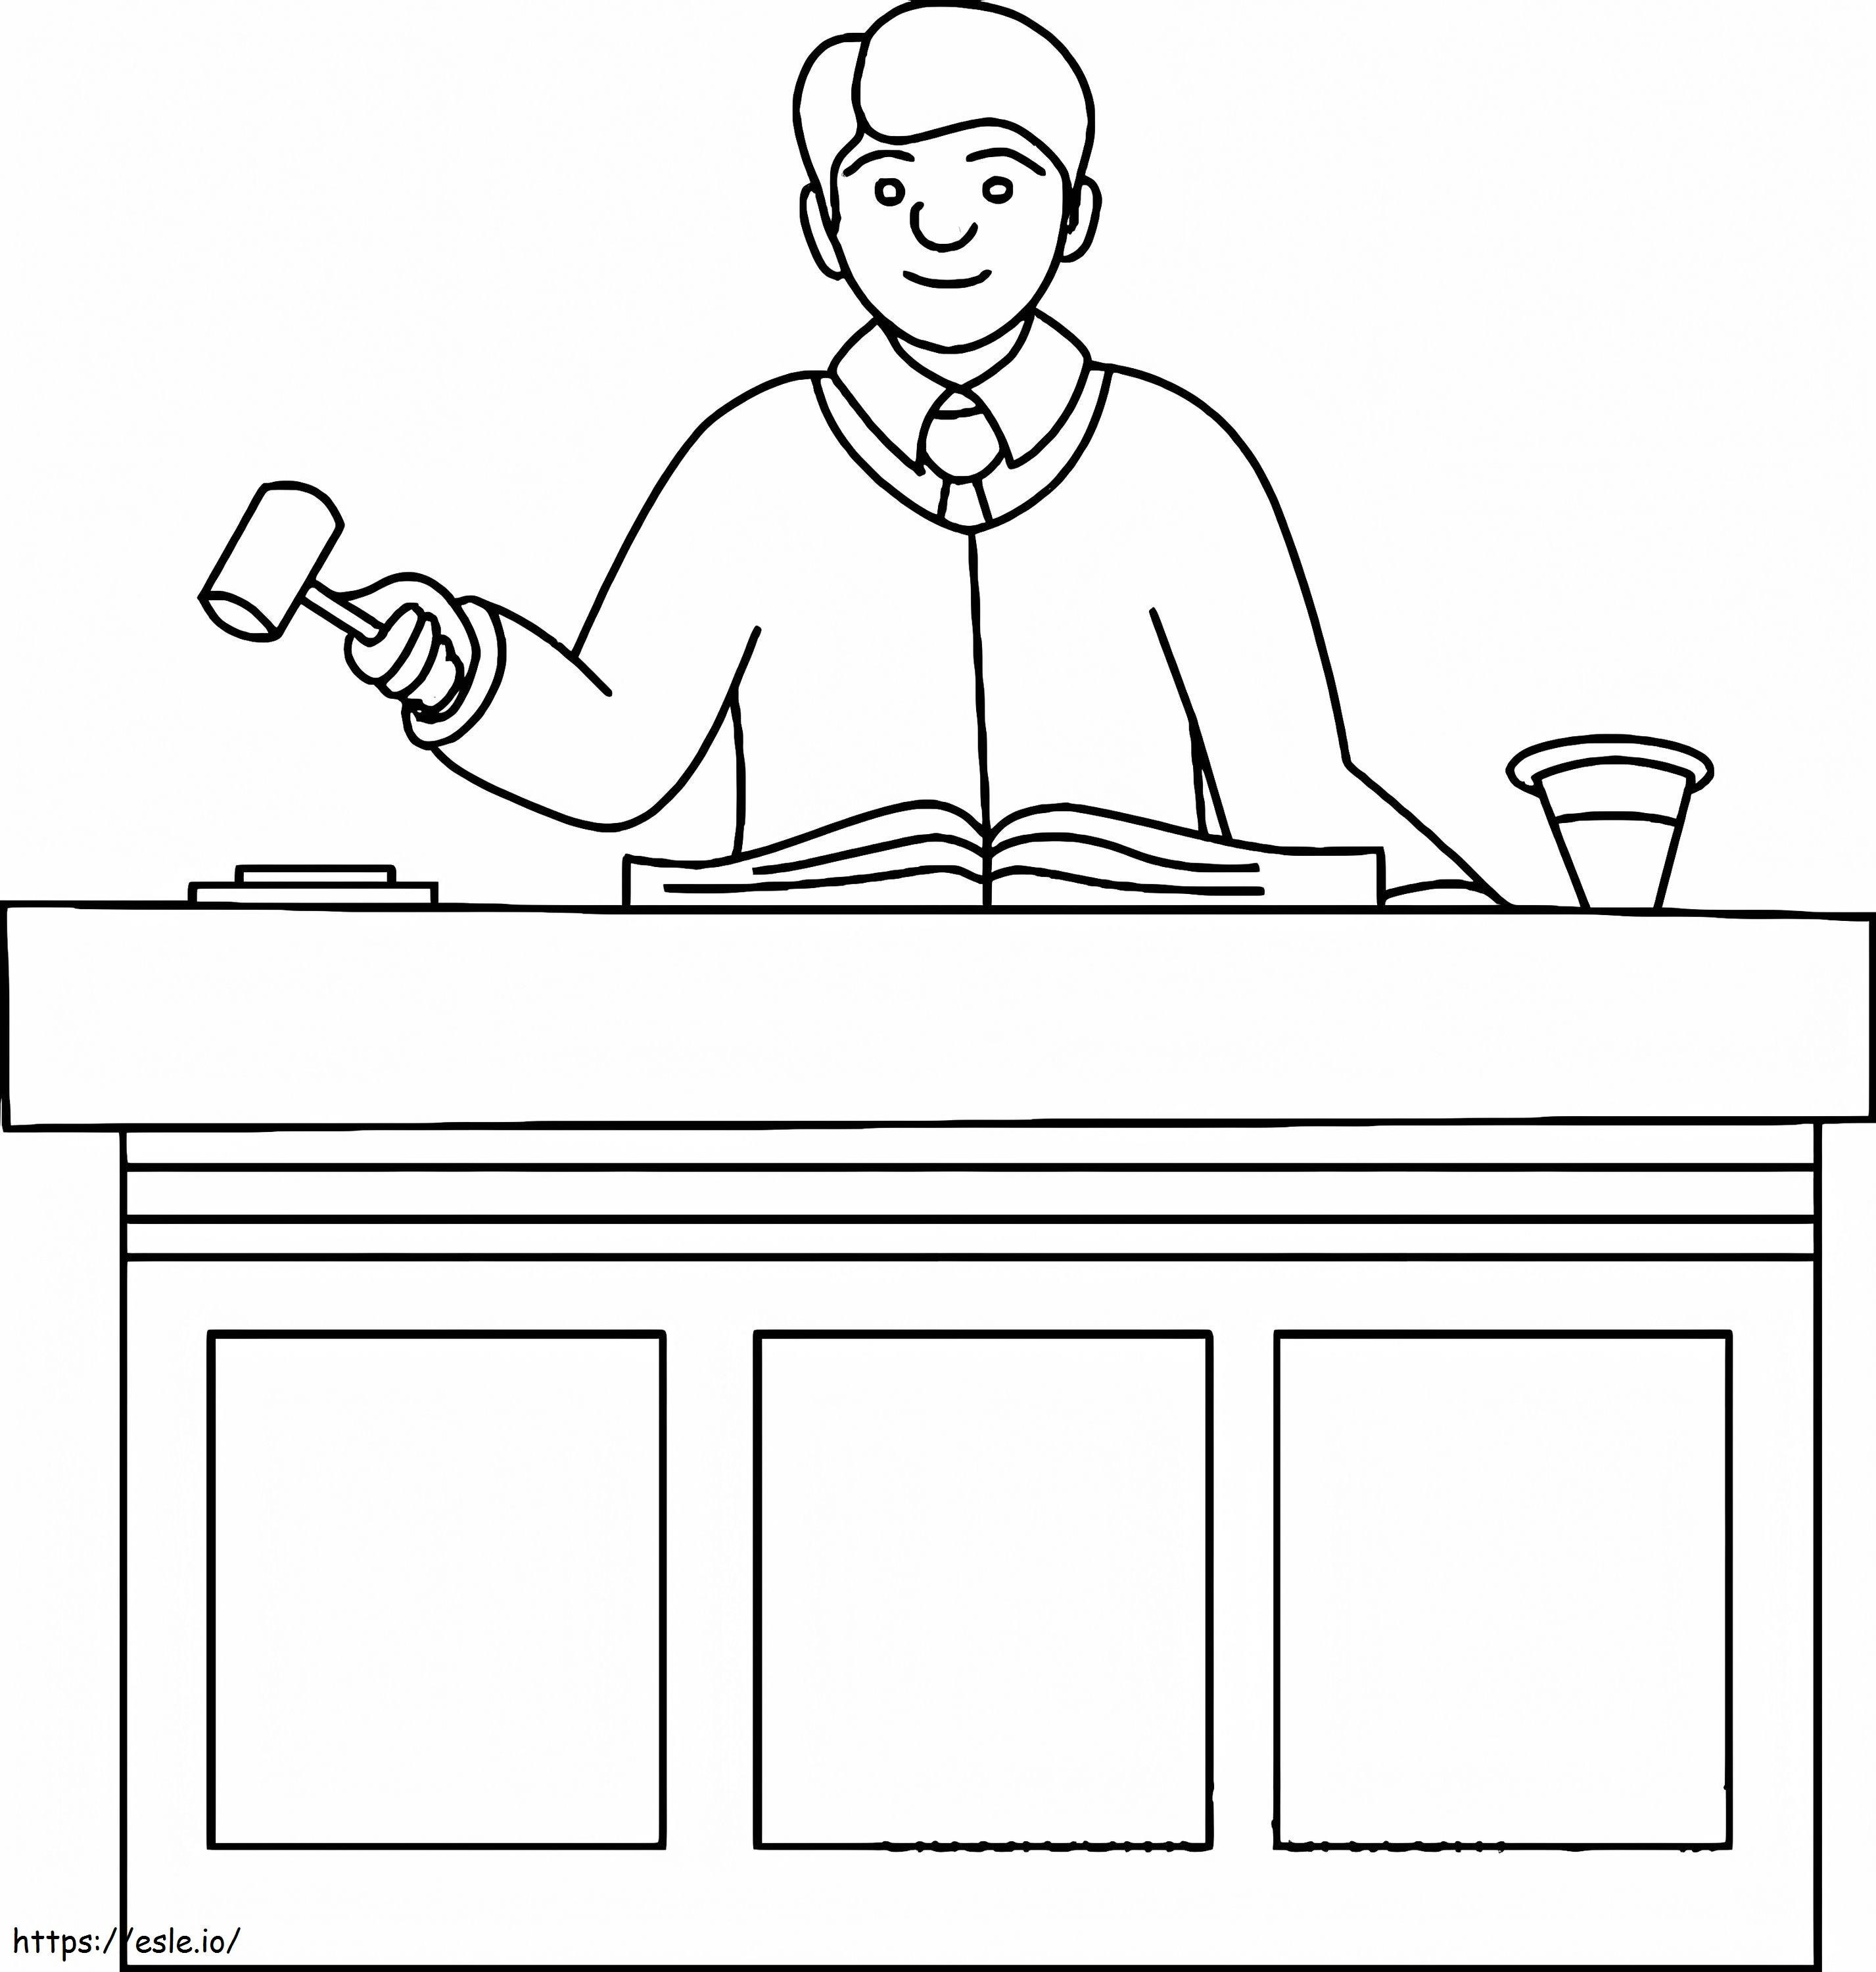 Judge 11 coloring page